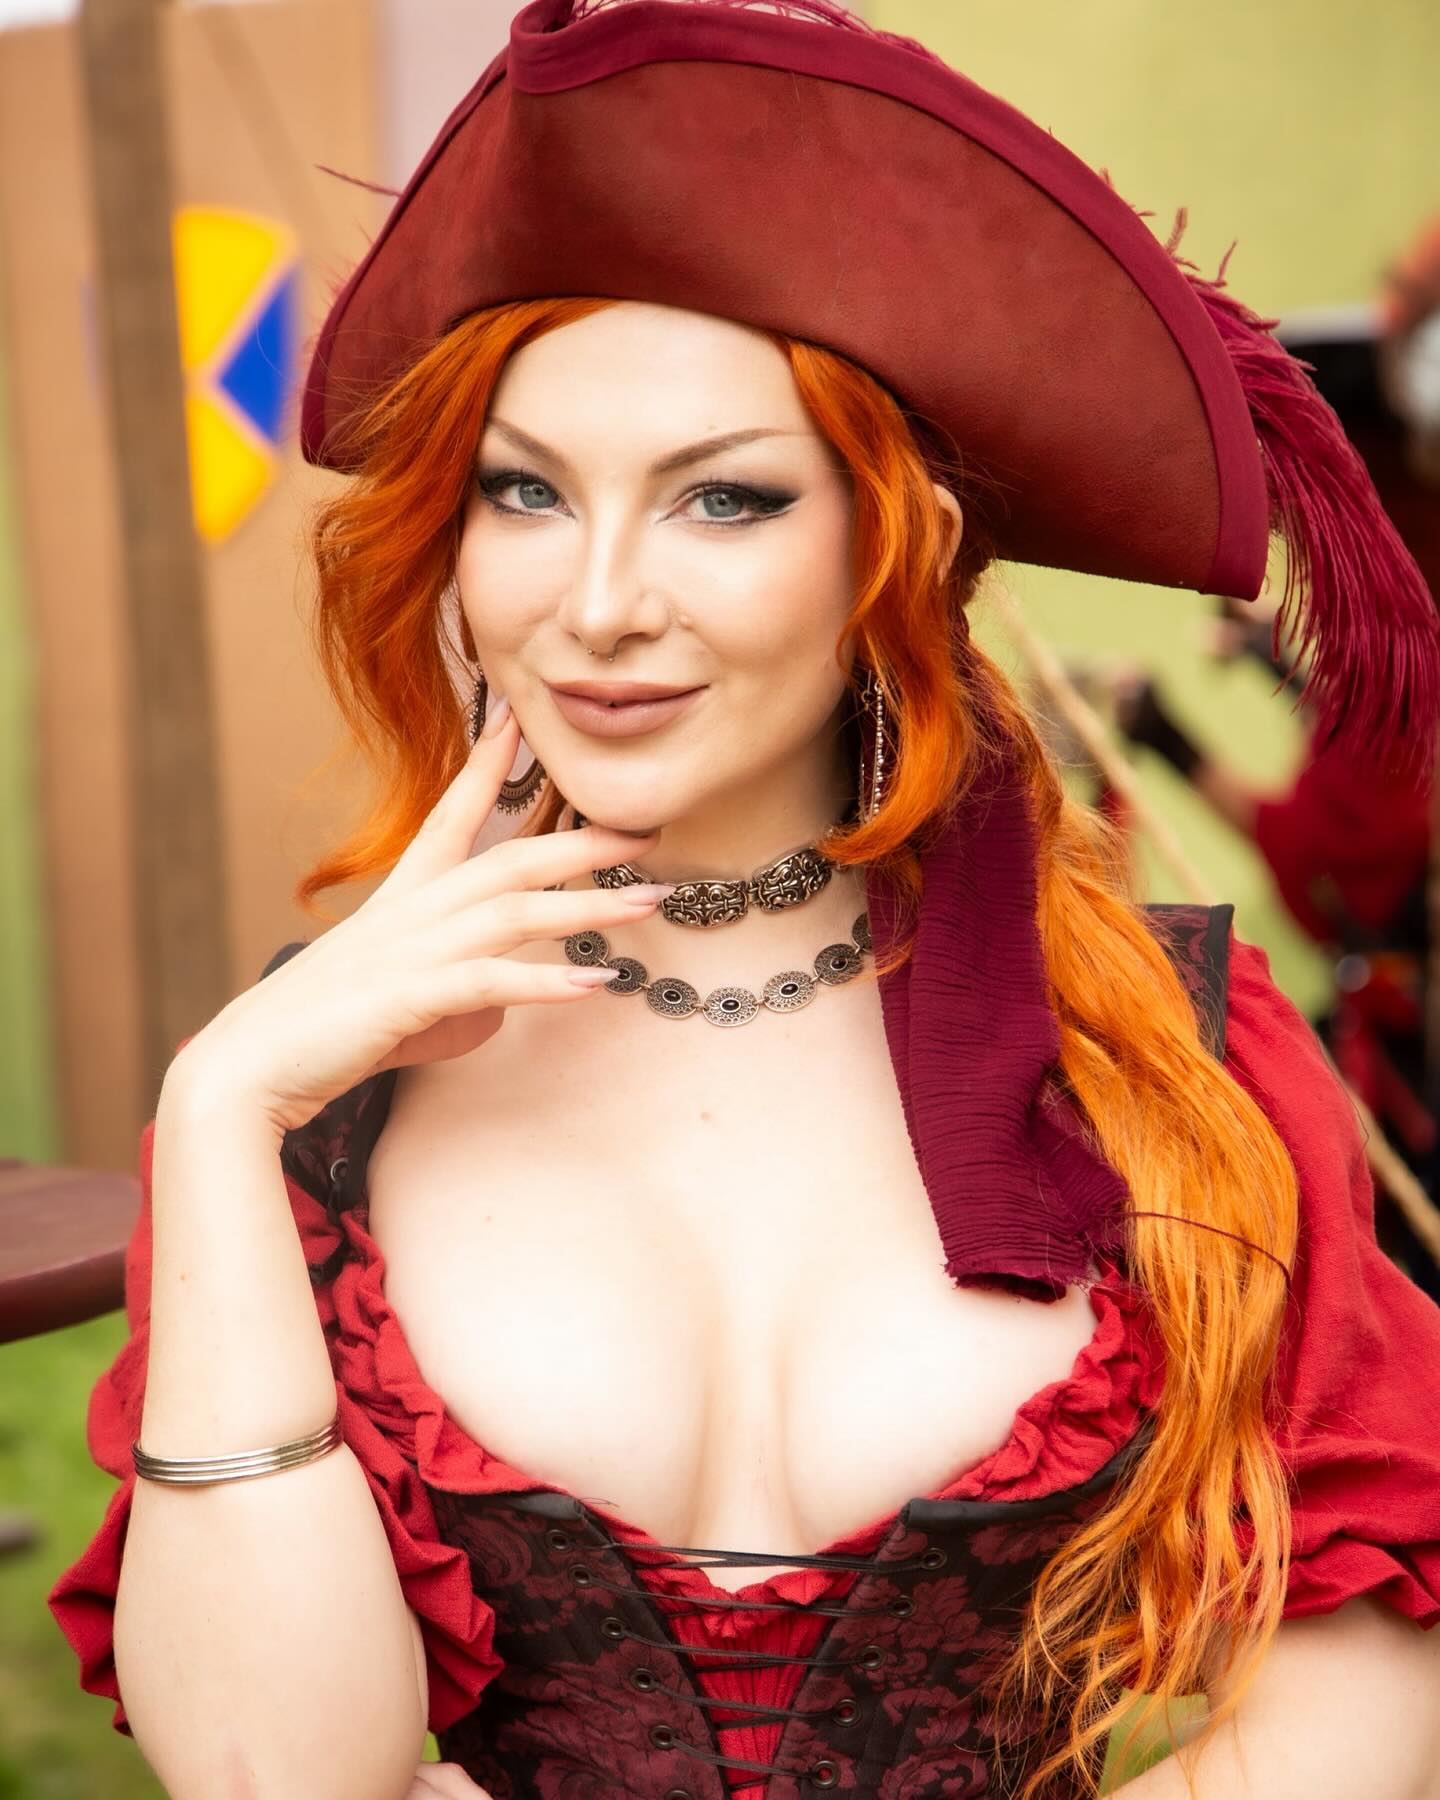 We wants the RedHead!

Pirate weekend at @renaissancepleasurefaire was fun but wet! It rained most of the day each day but it was still a delight splashing around with friends and working the Oubliette! Come by this weekend for more drinks down your throats me hearties!

Photos by @happytriggerla 
Cosplay garb made by me 

#redhead #pirate #renfaire